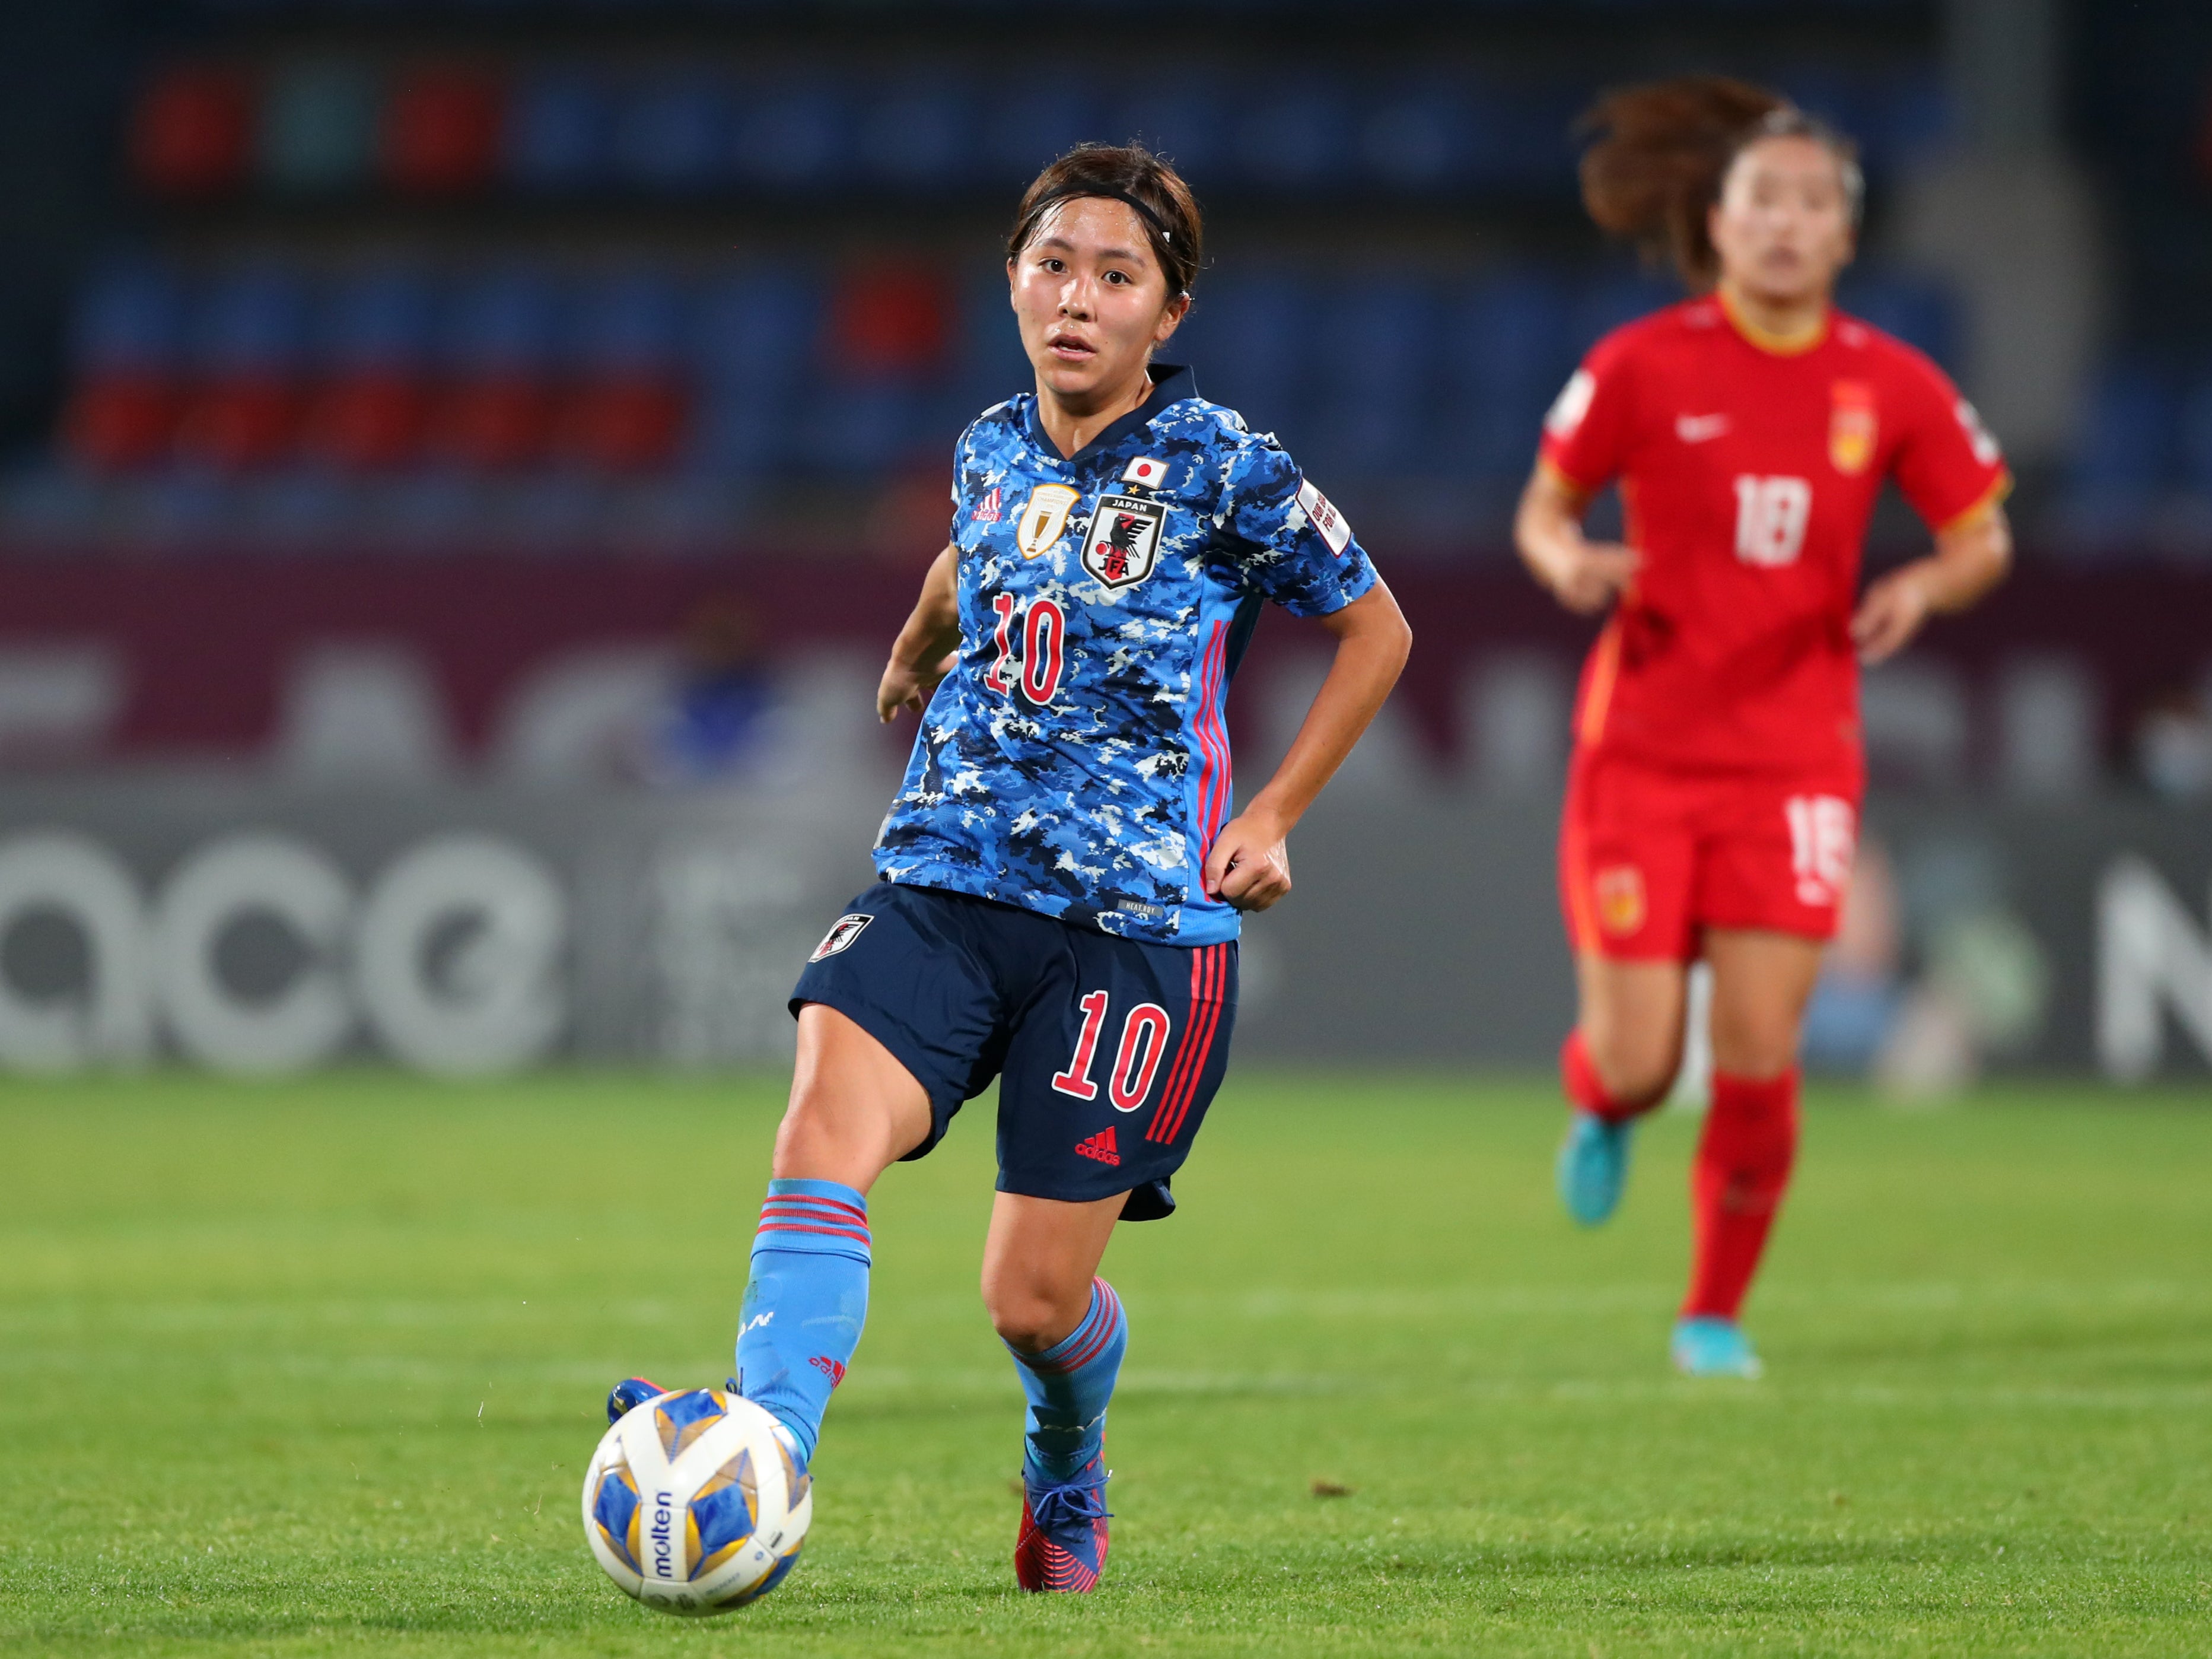 Mana Iwabuchi spent the second half of the WSL season on loan at Tottenham but has missed out on Japan’s World Cup squad